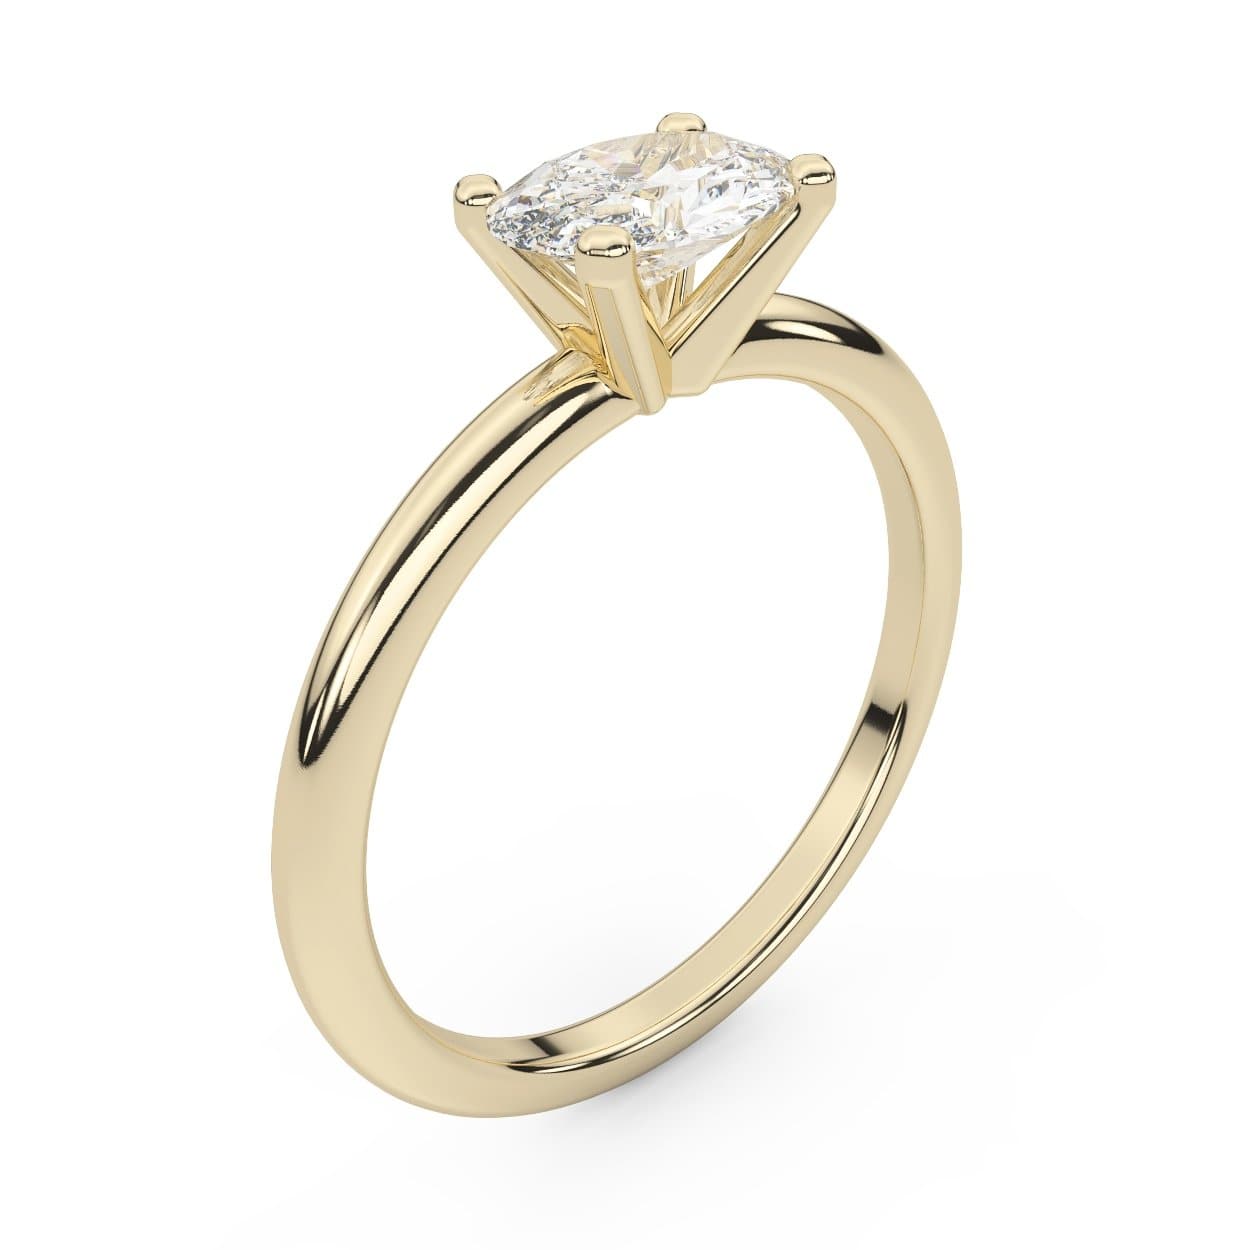 East West Oval Cut Diamond Engagement Ring